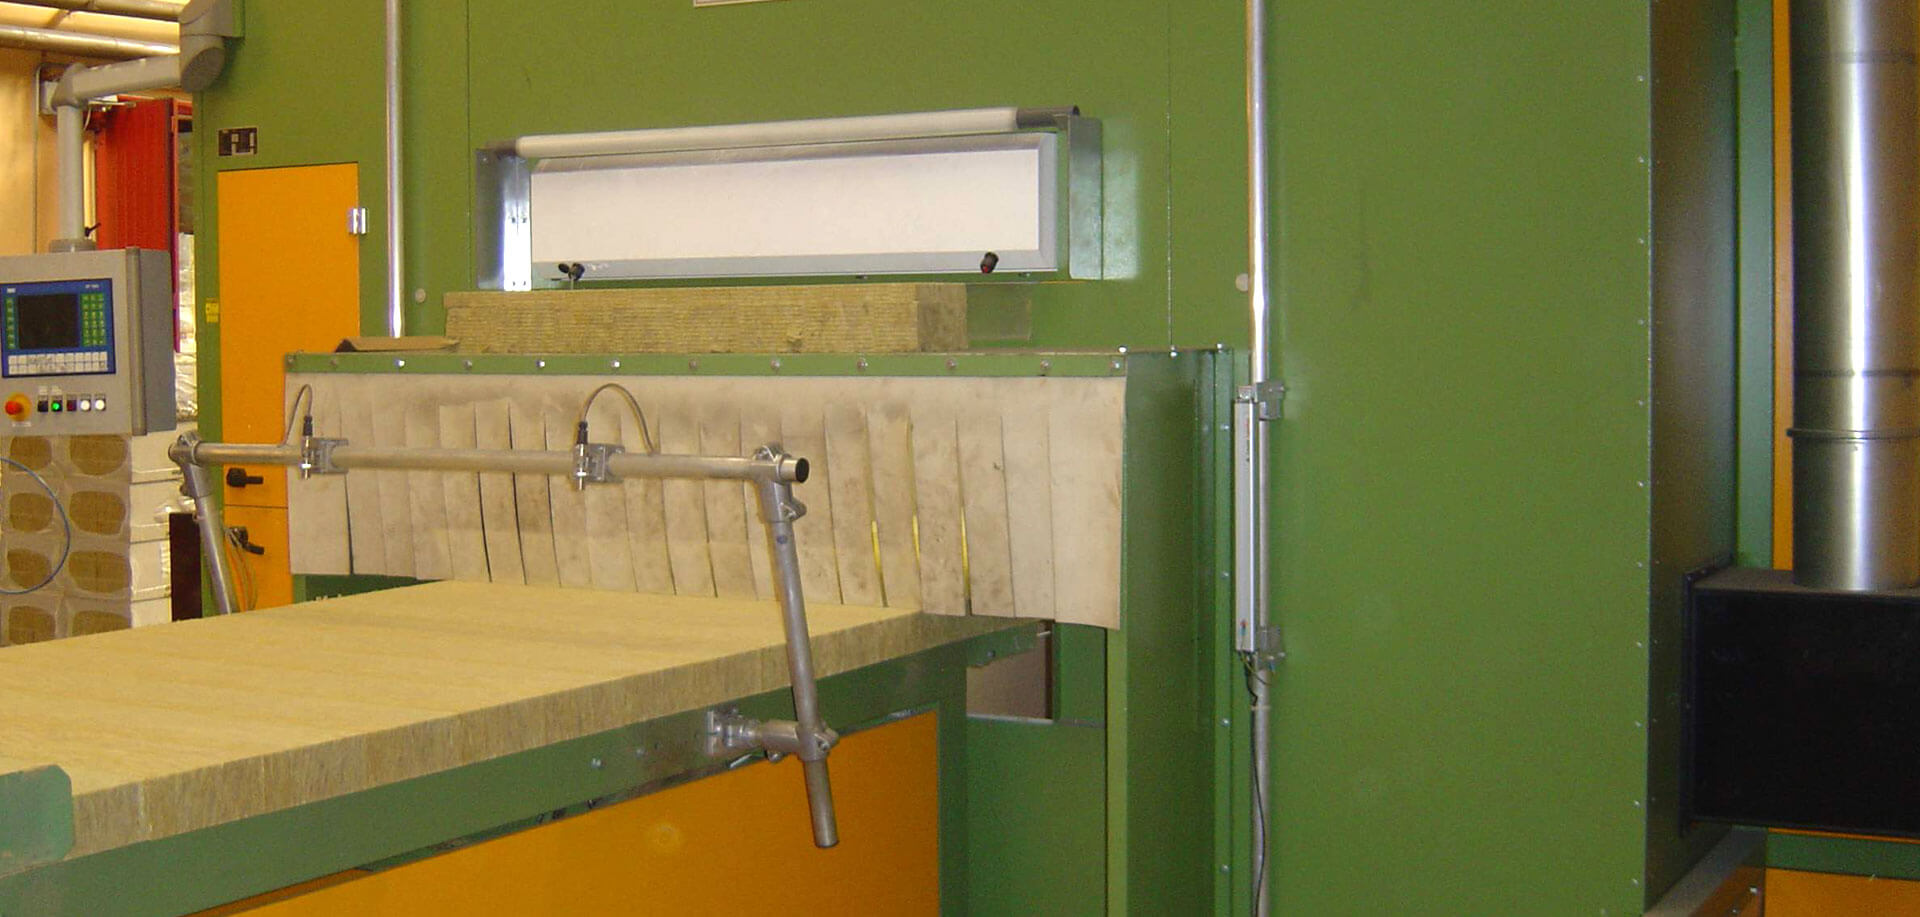 Coating systems for coating mineral wool panels or mineral wool slats - InTEC